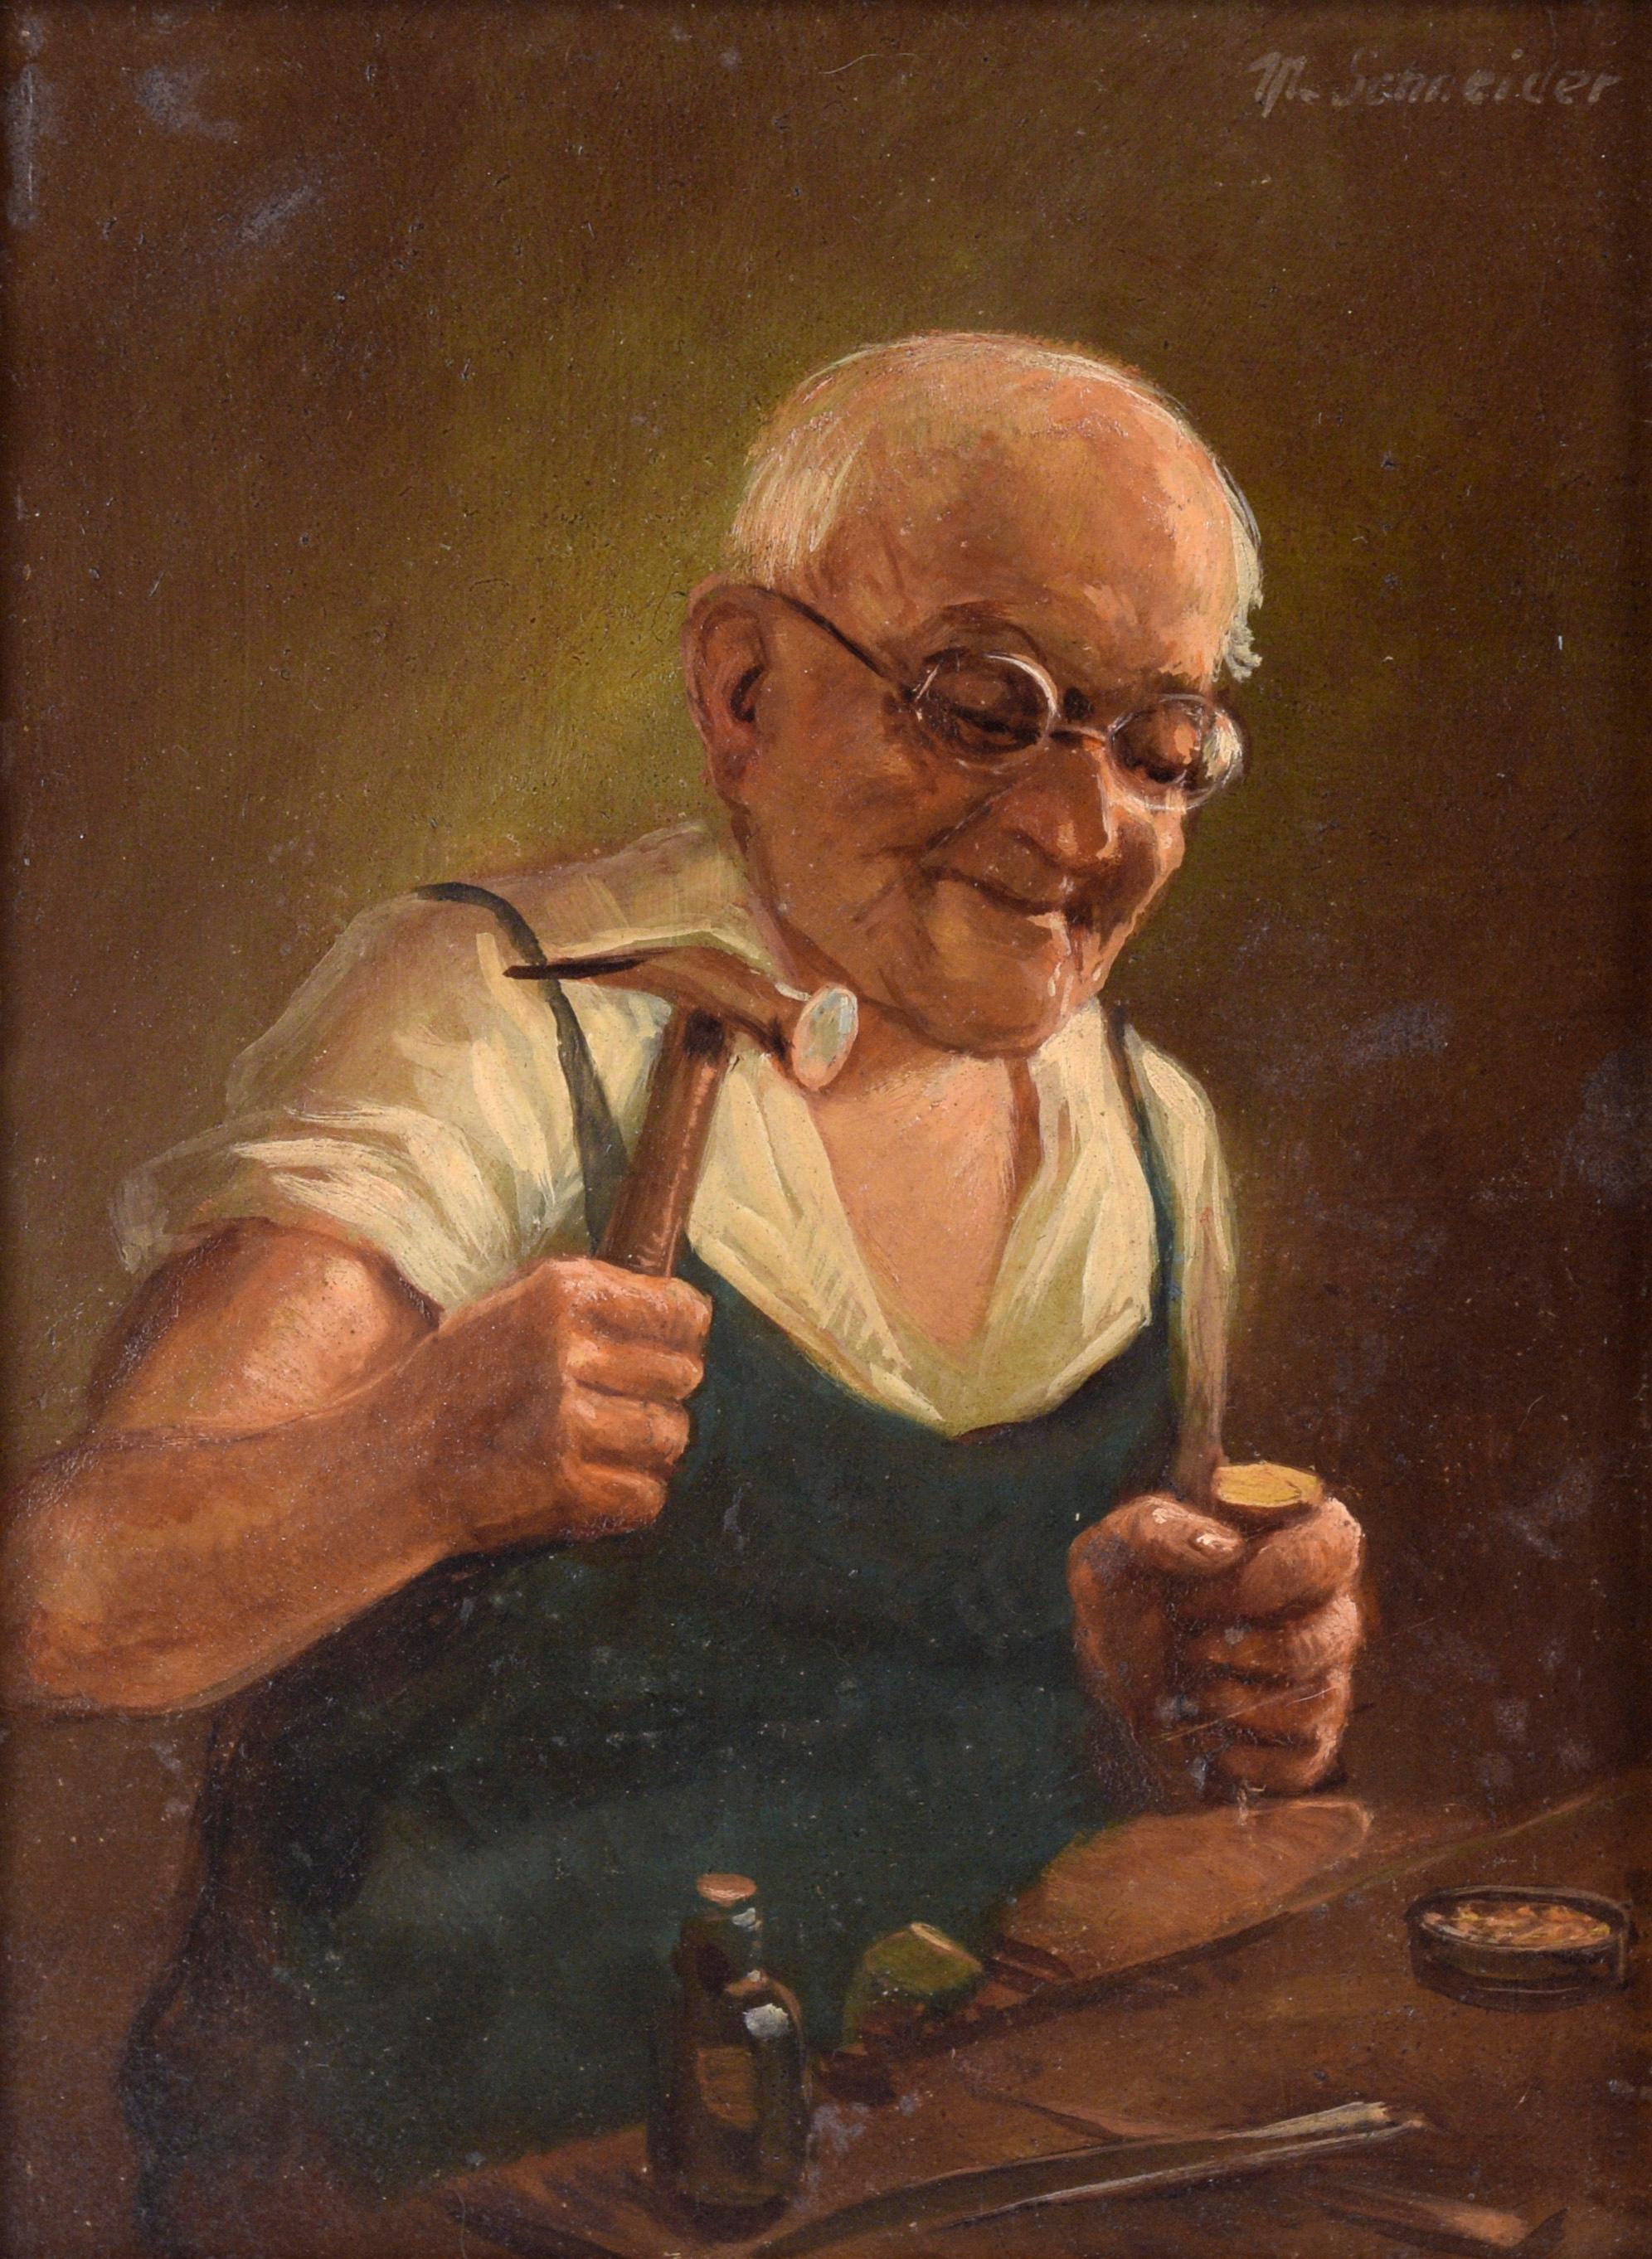 Shoemaker at Work - Portrait in Oil on Masonite - Painting by Max Schneider